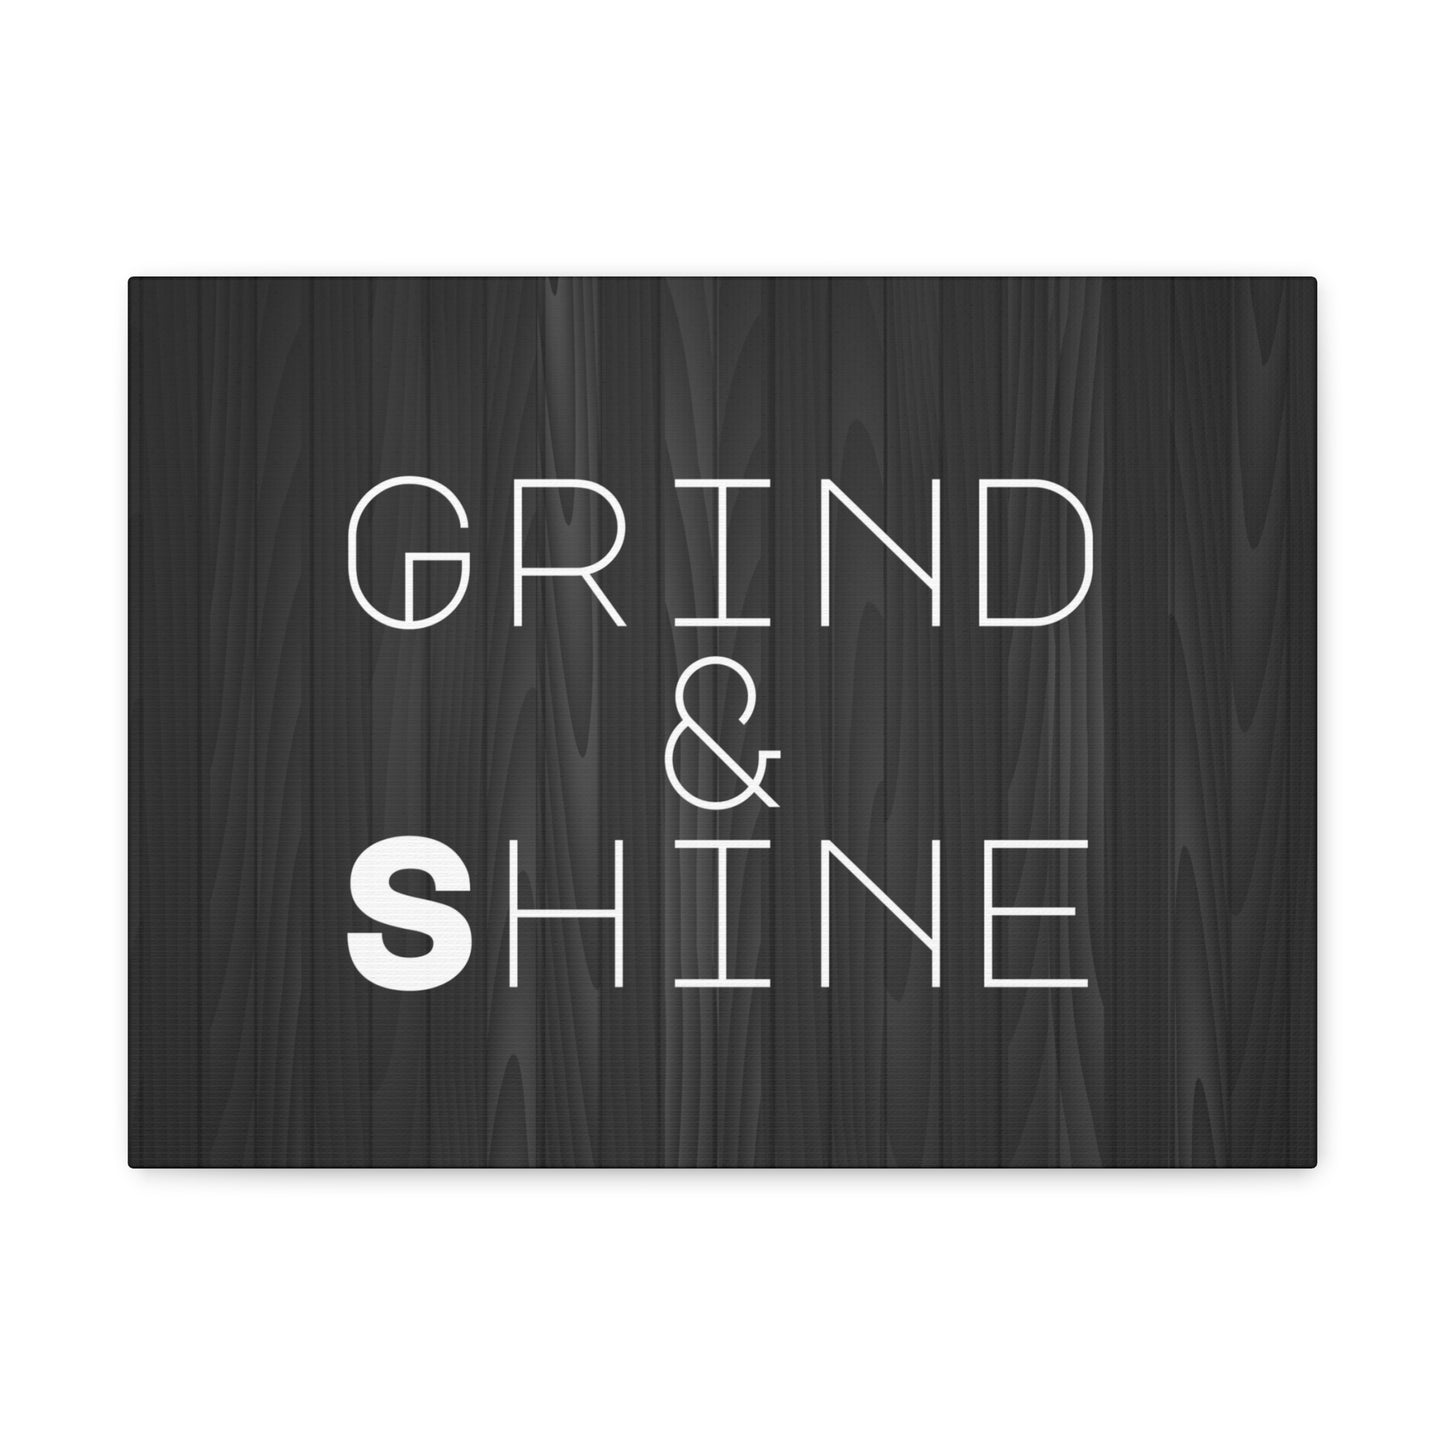 "Grind & Shine" Wall Art - Weave Got Gifts - Unique Gifts You Won’t Find Anywhere Else!